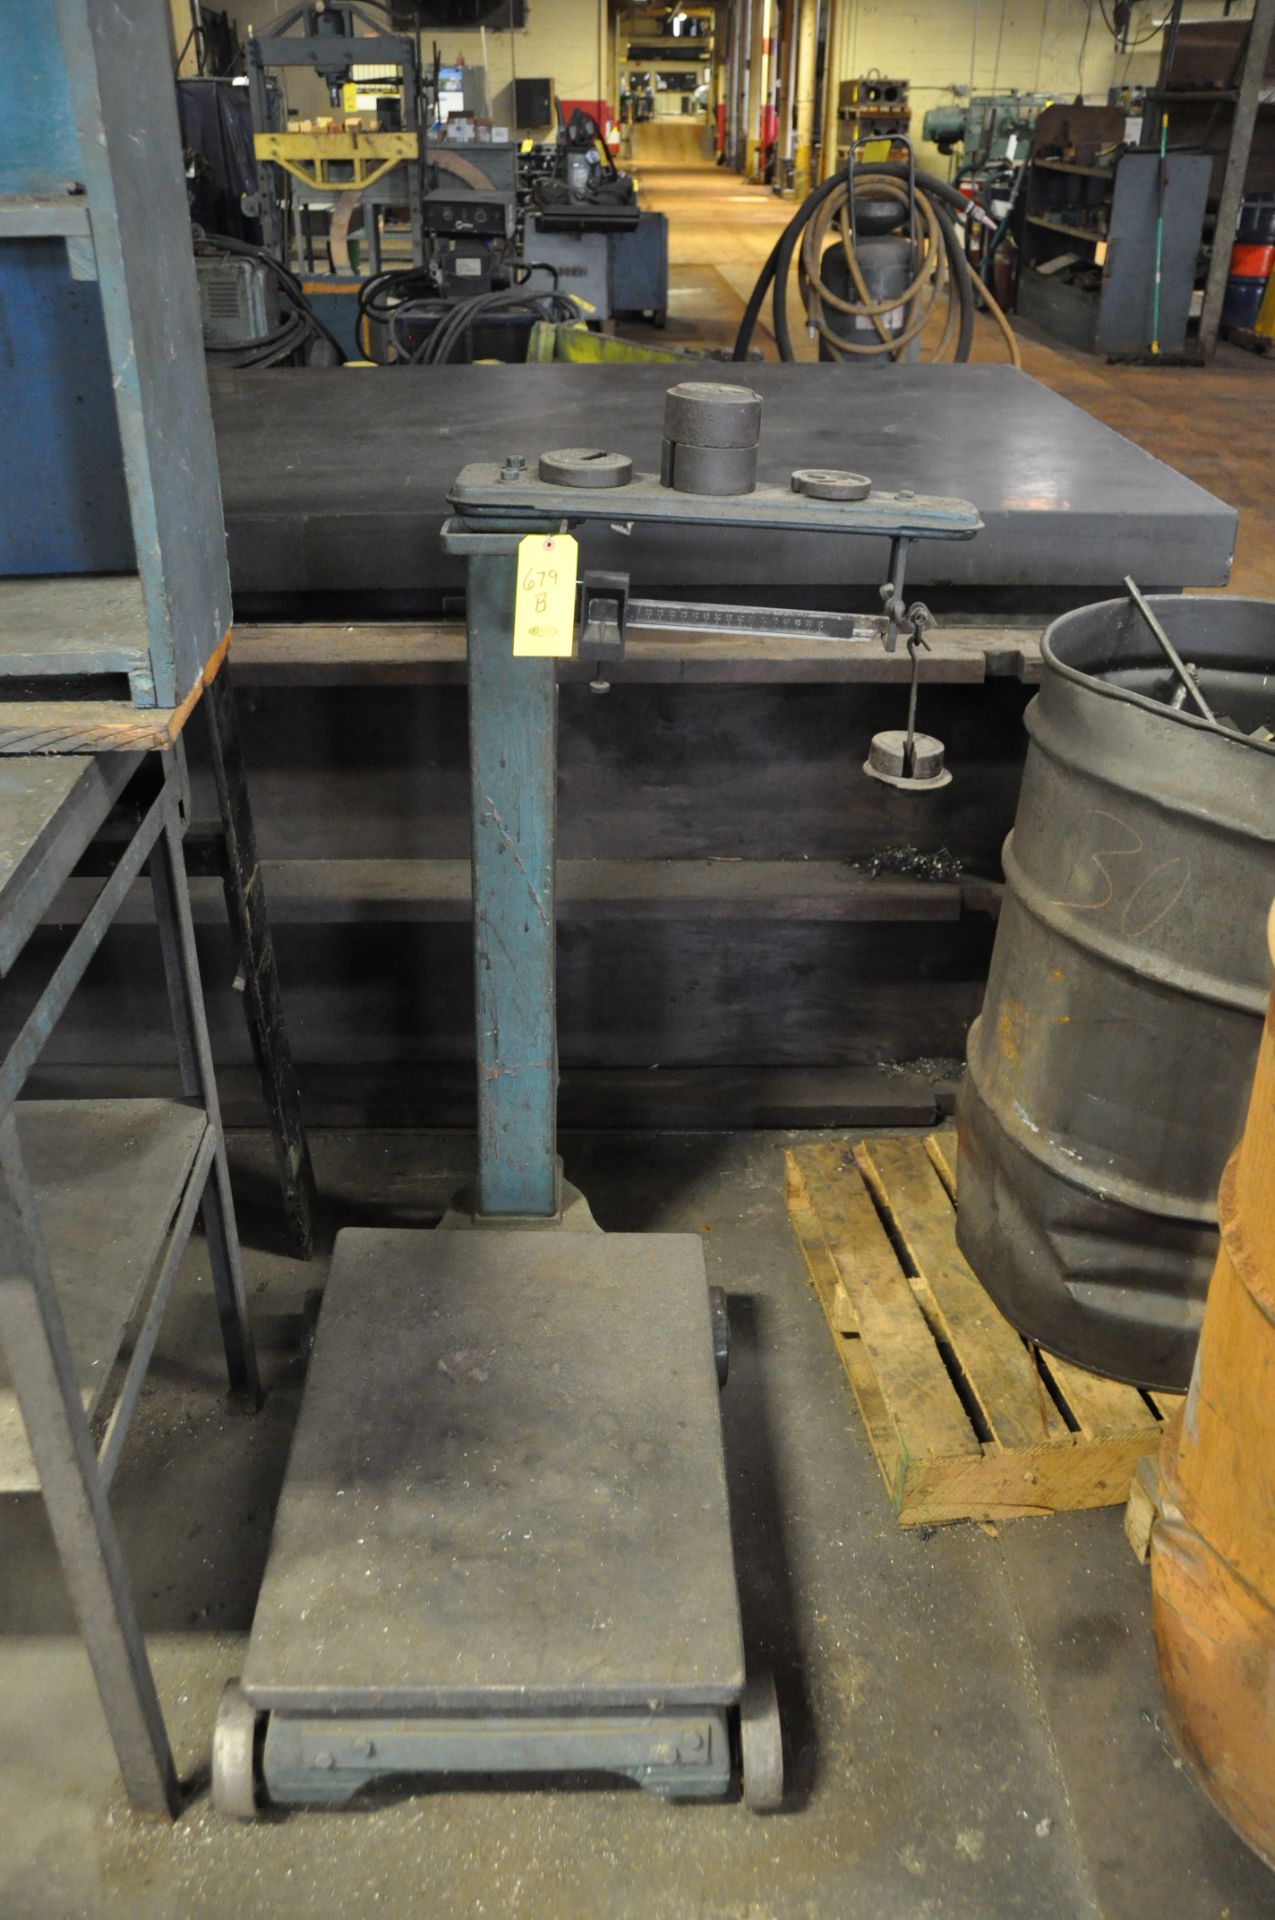 PORTABLE FLOOR SCALE AND (2) 55 GALLON DRUMS OF STEEL SCRAP.